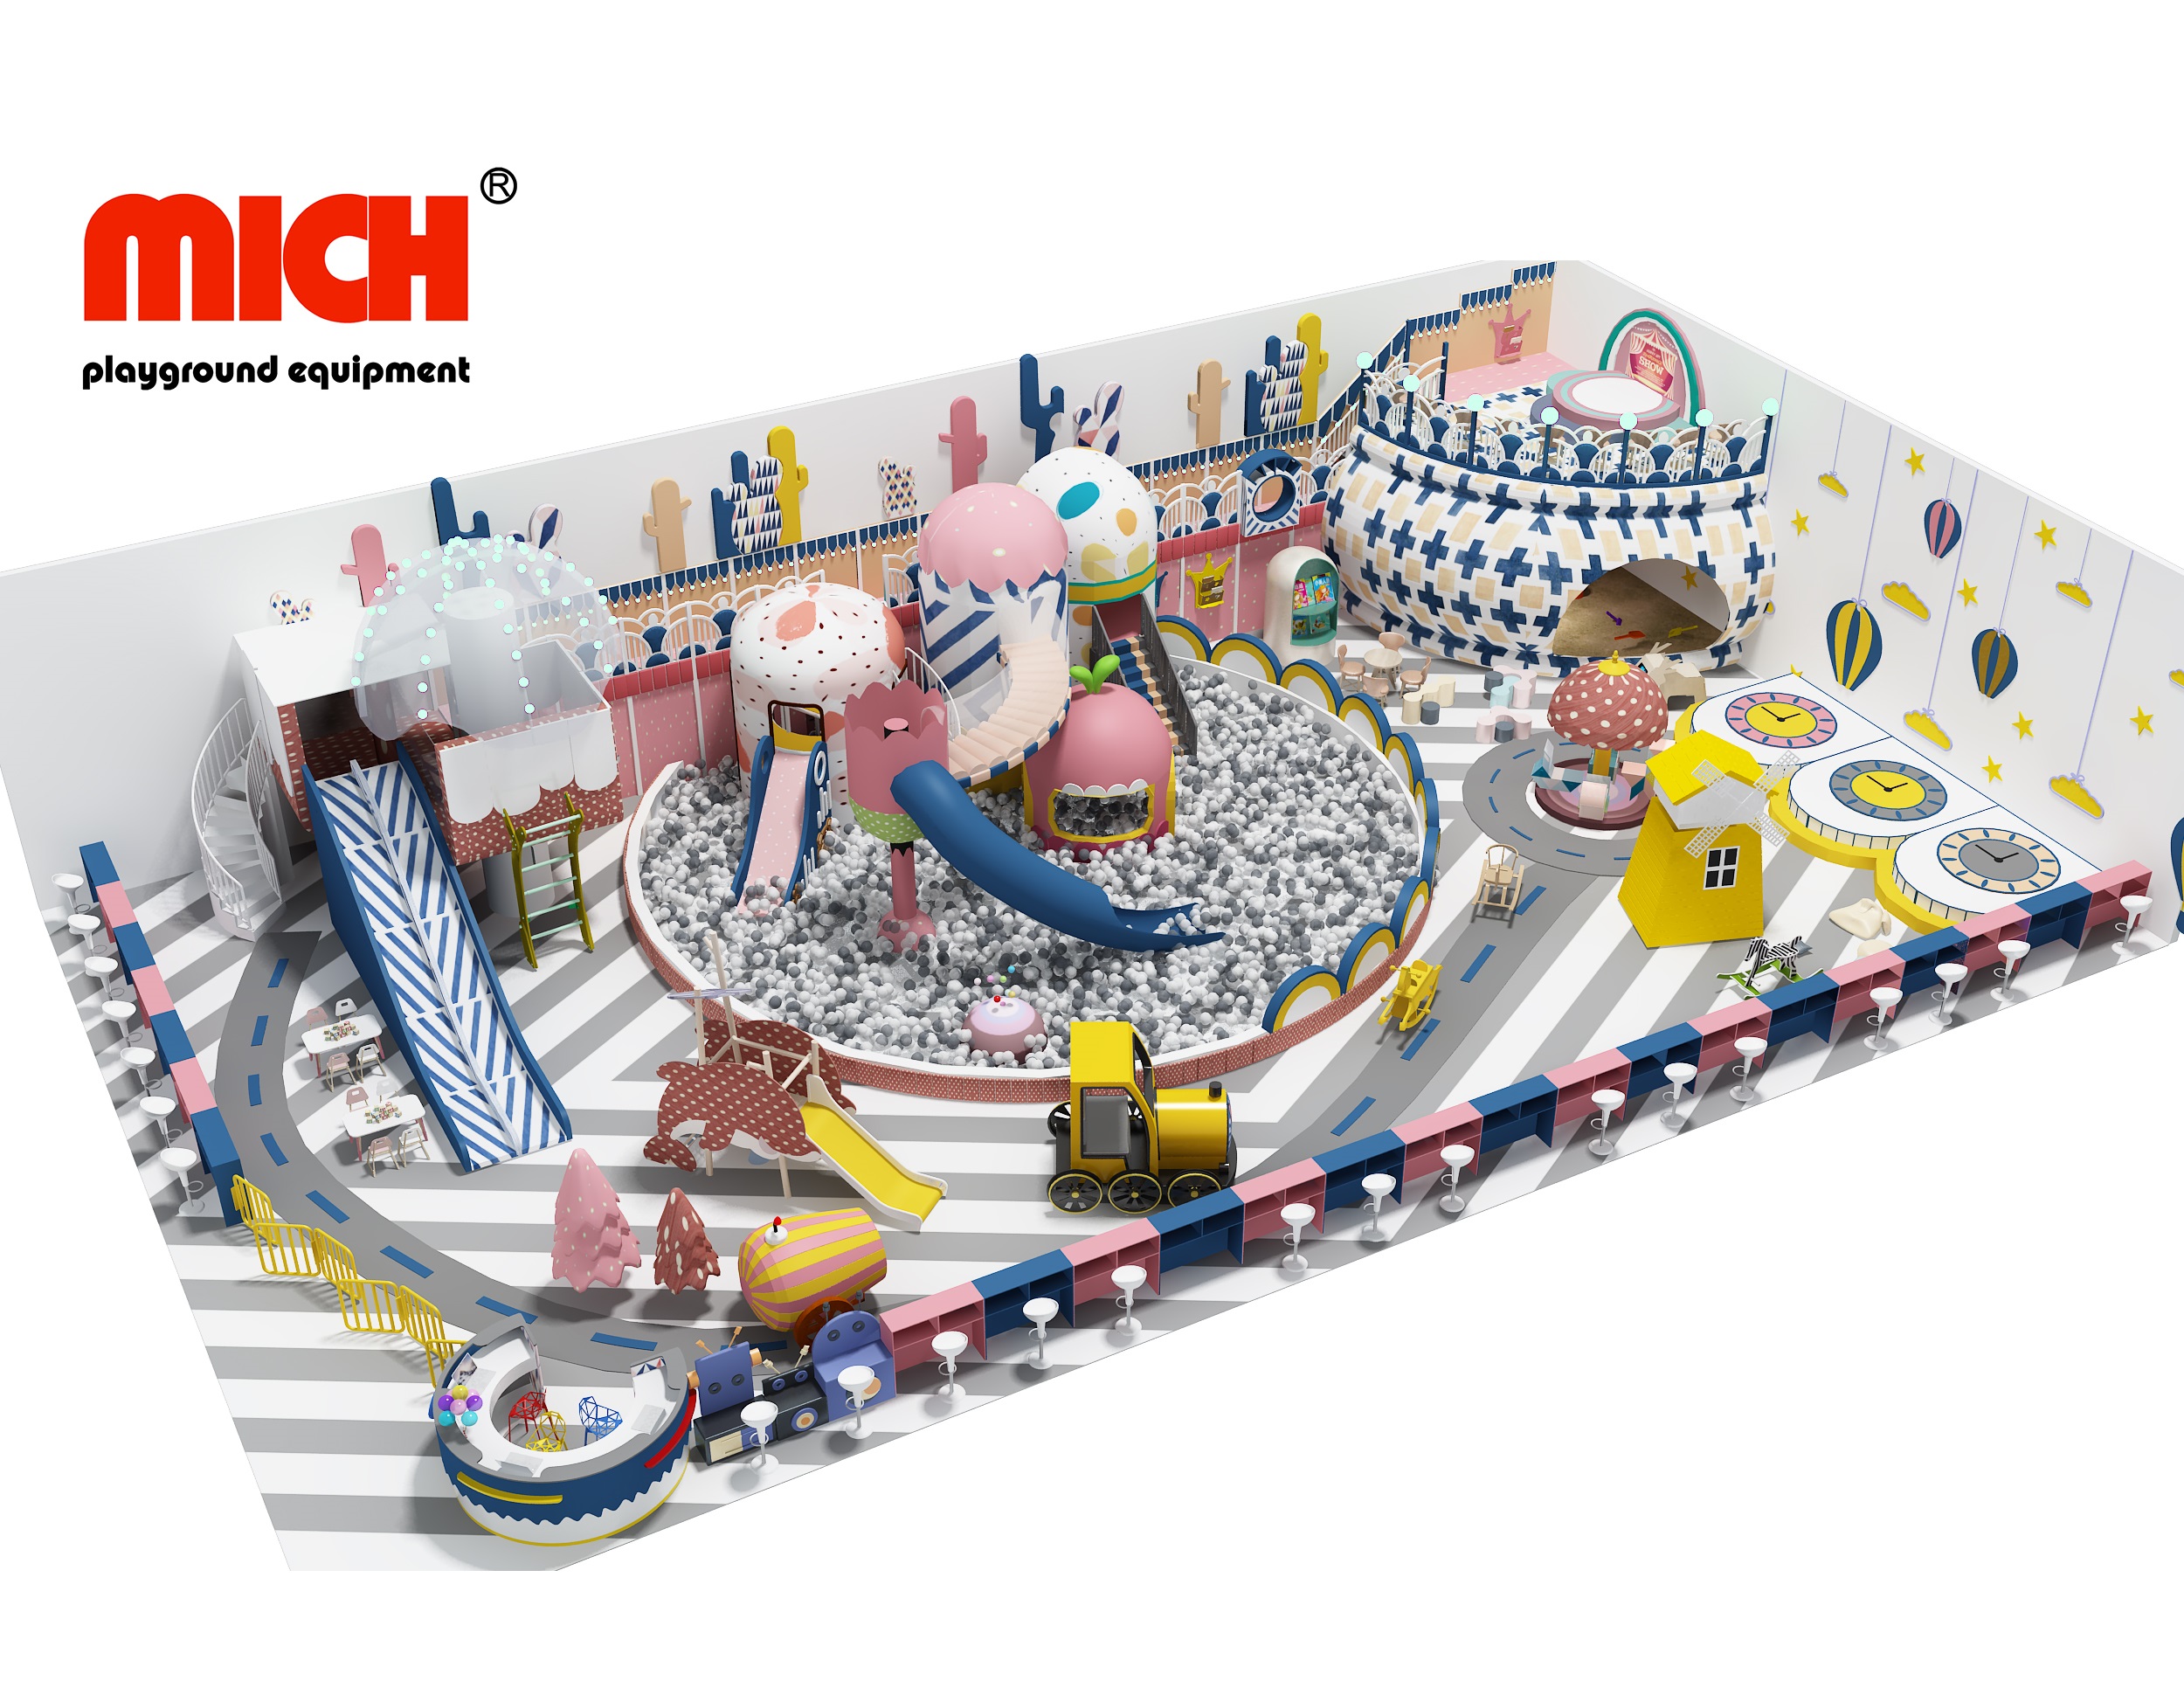 What is the benefit of indoor playground equipment?